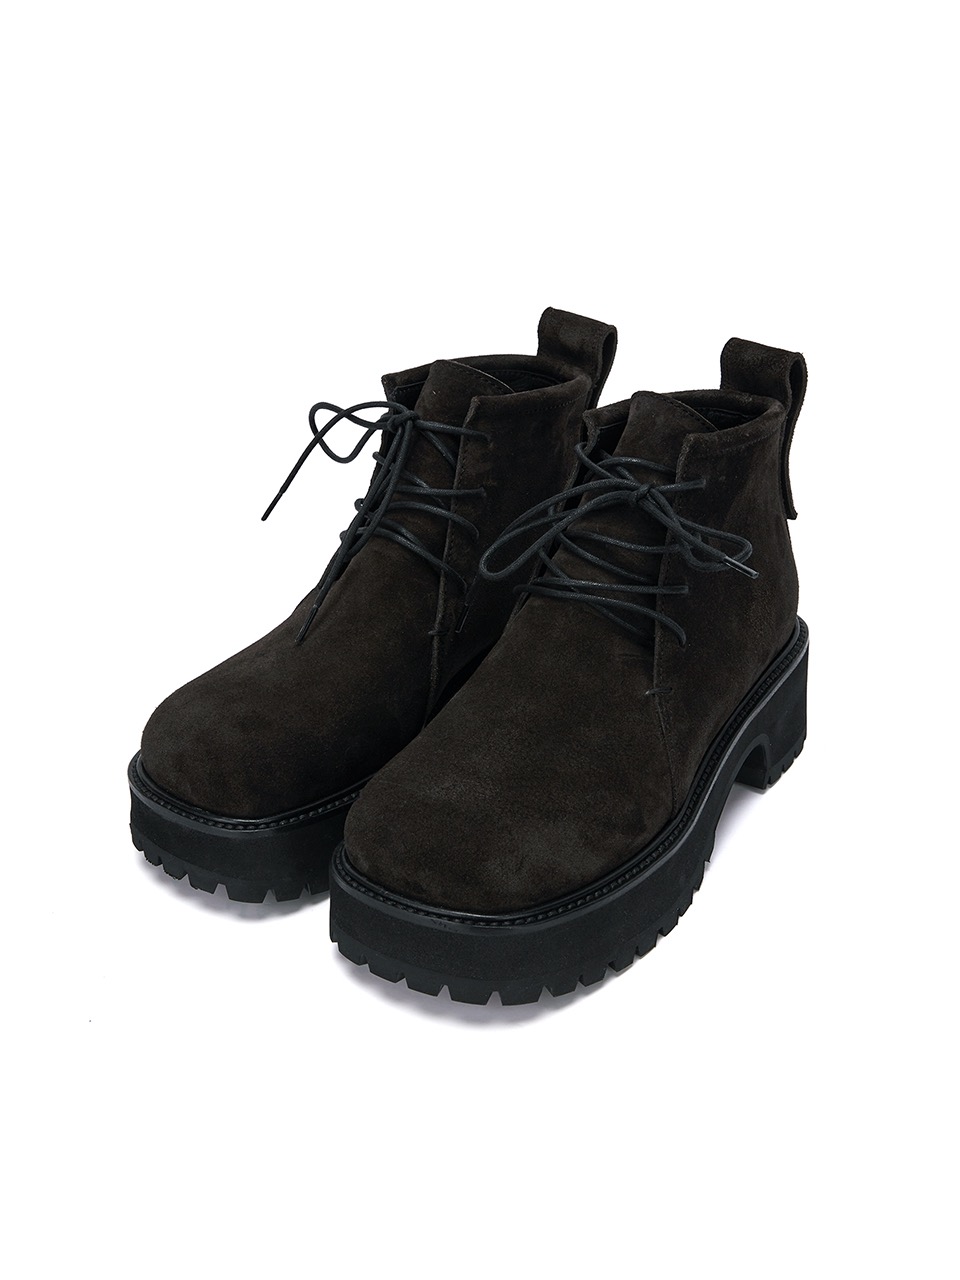 LACE-UP ANKLE BOOTS_dark brown suede